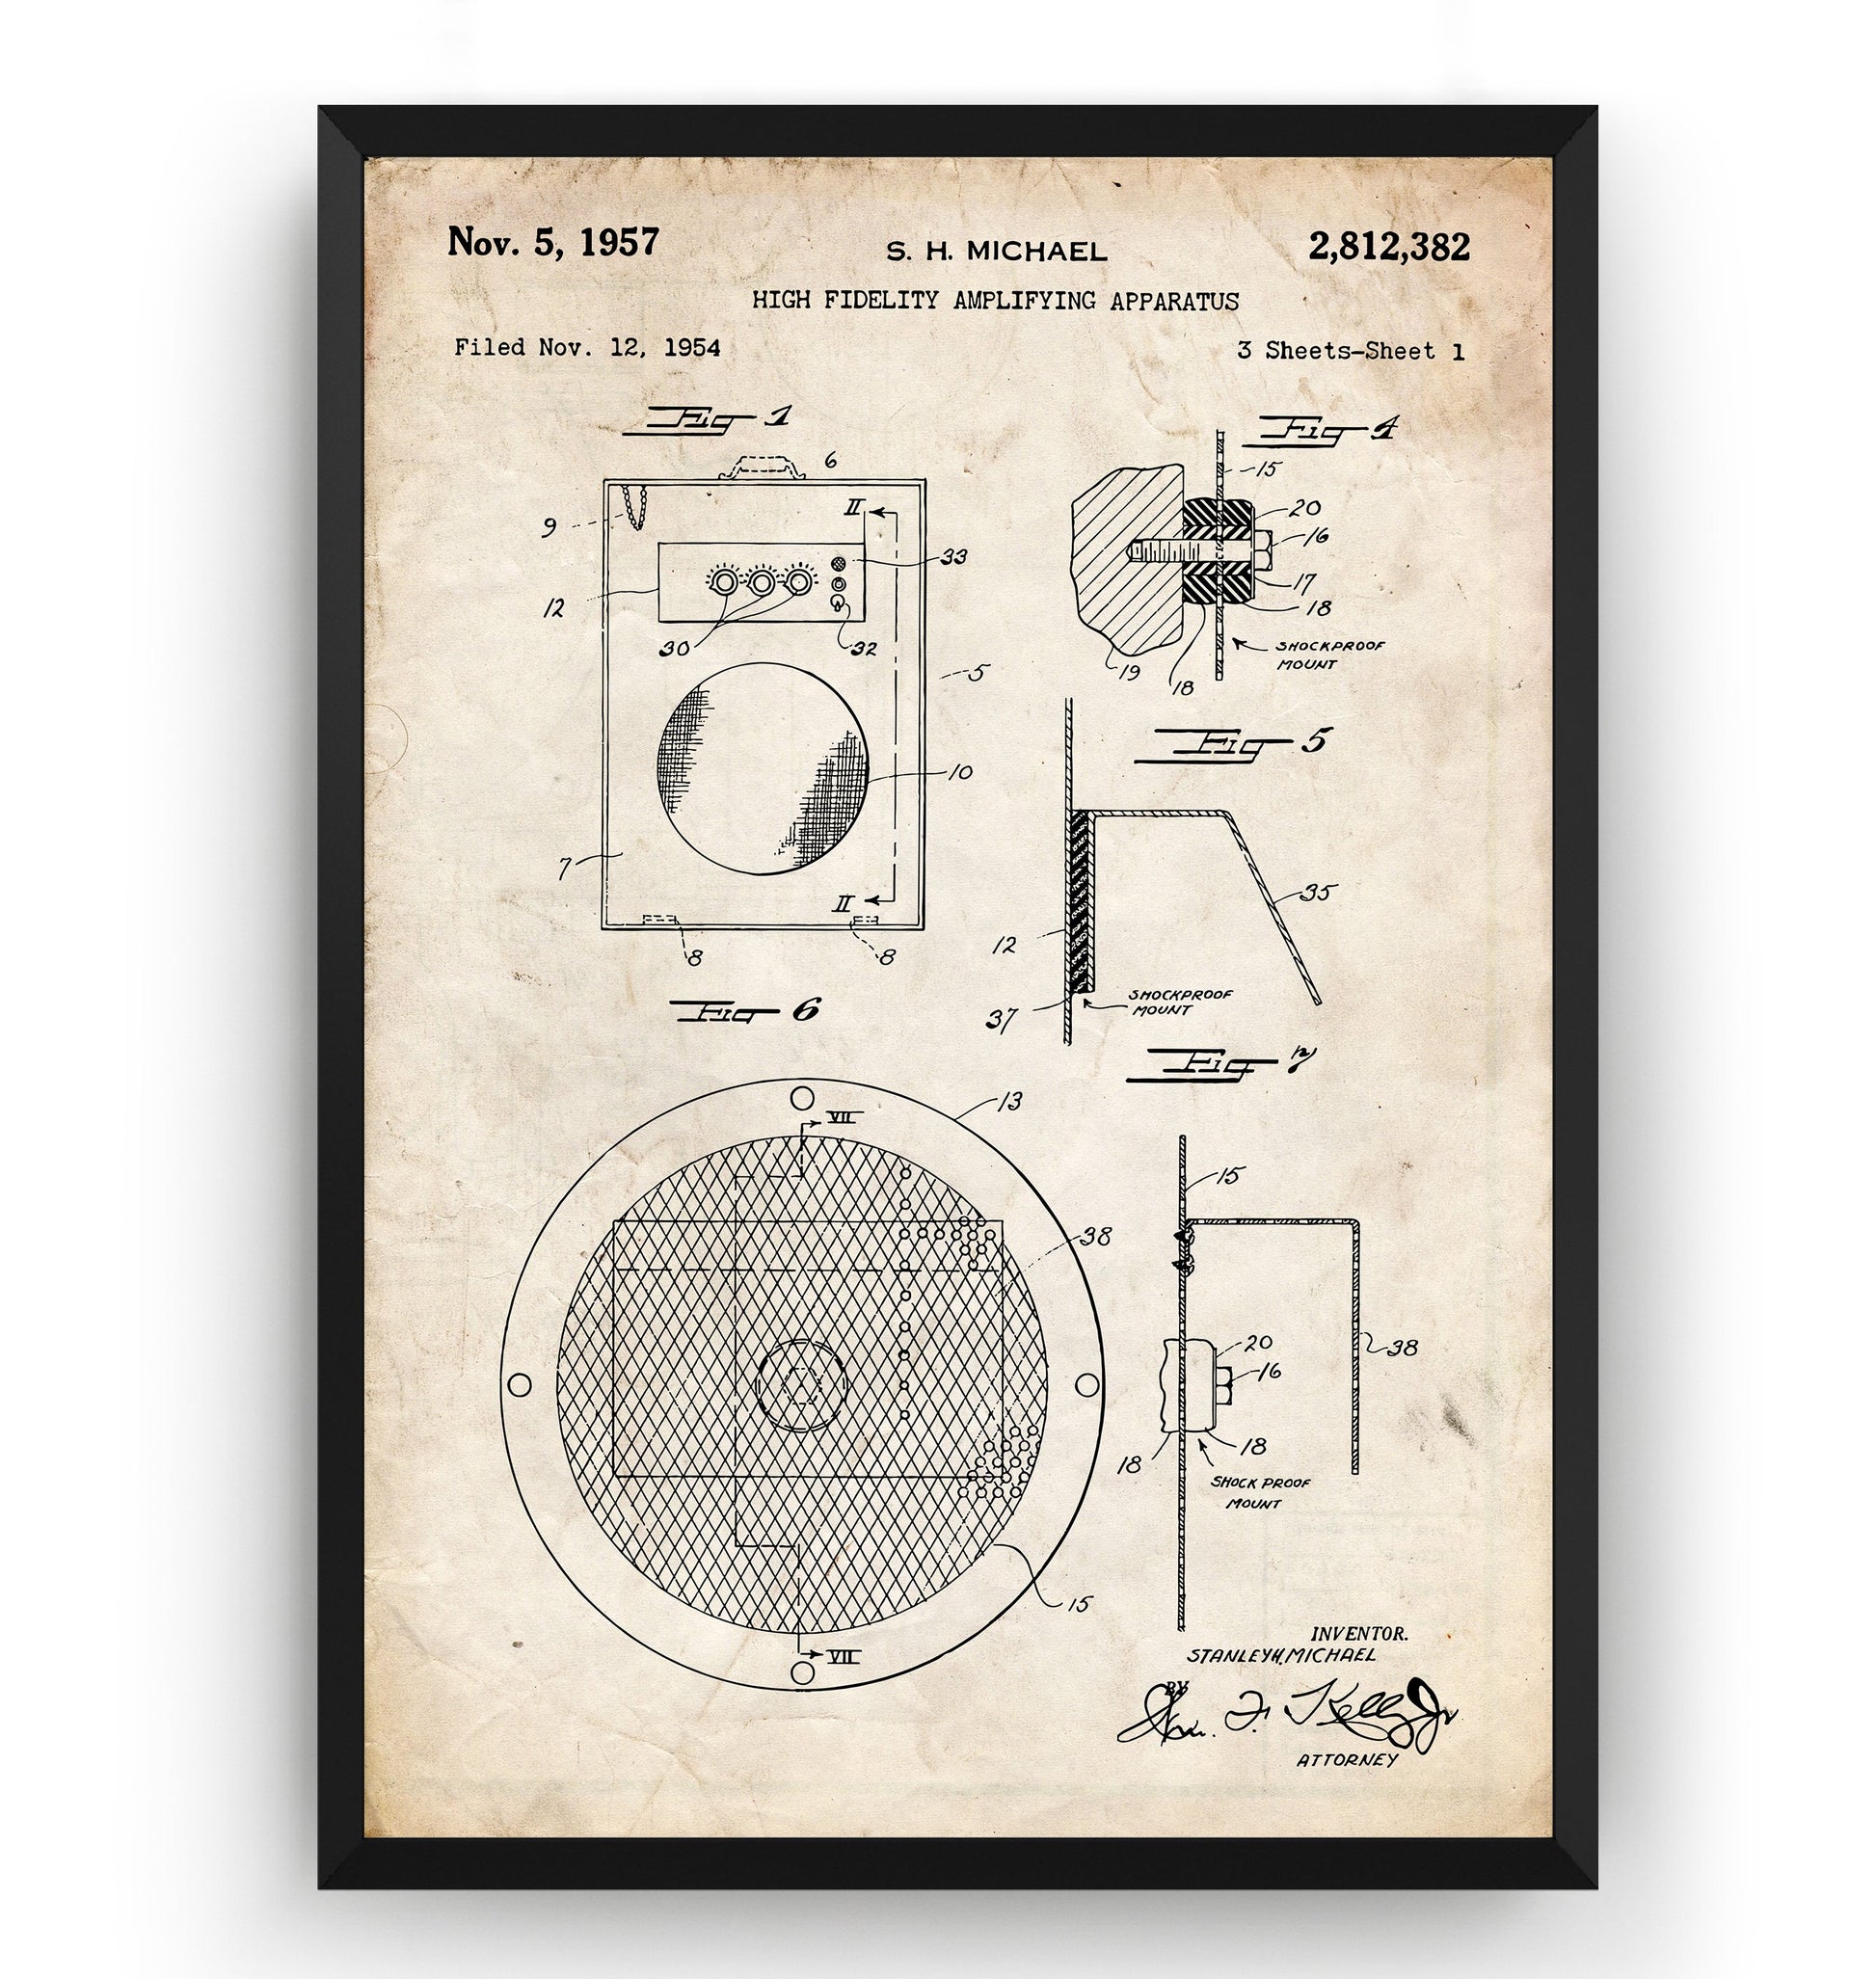 High Fidelity Amplifying Apparatus 1957 Patent Print - Magic Posters